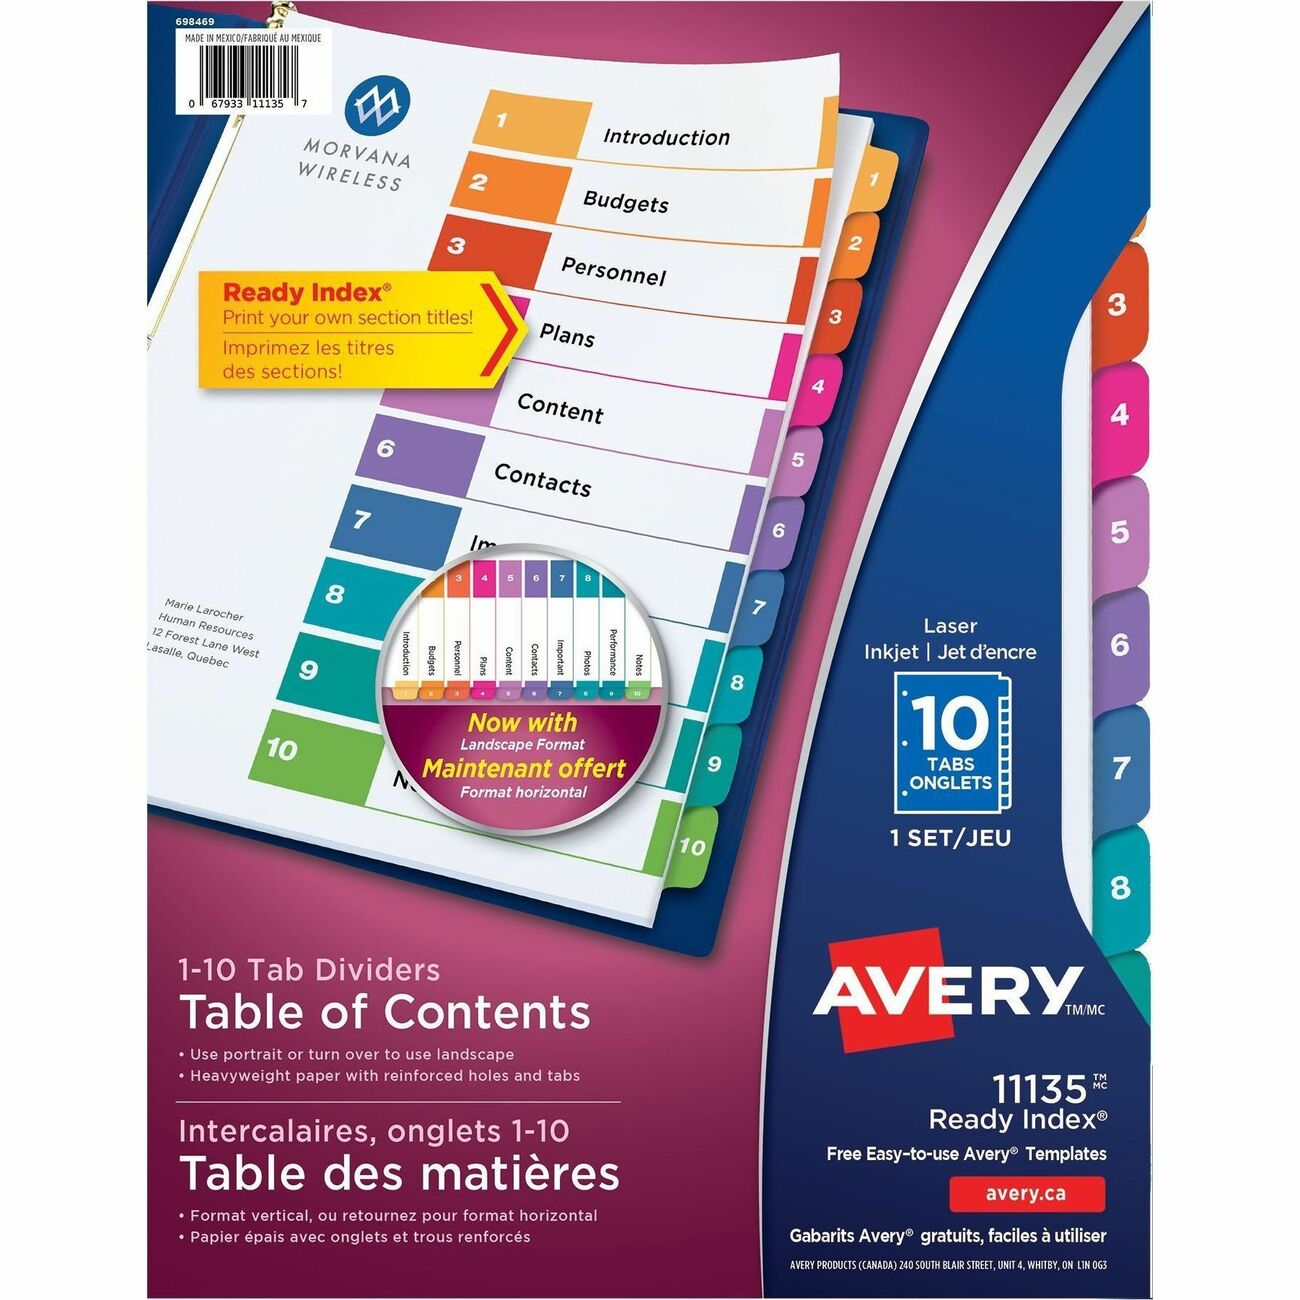 avery design pro 5.2 free download